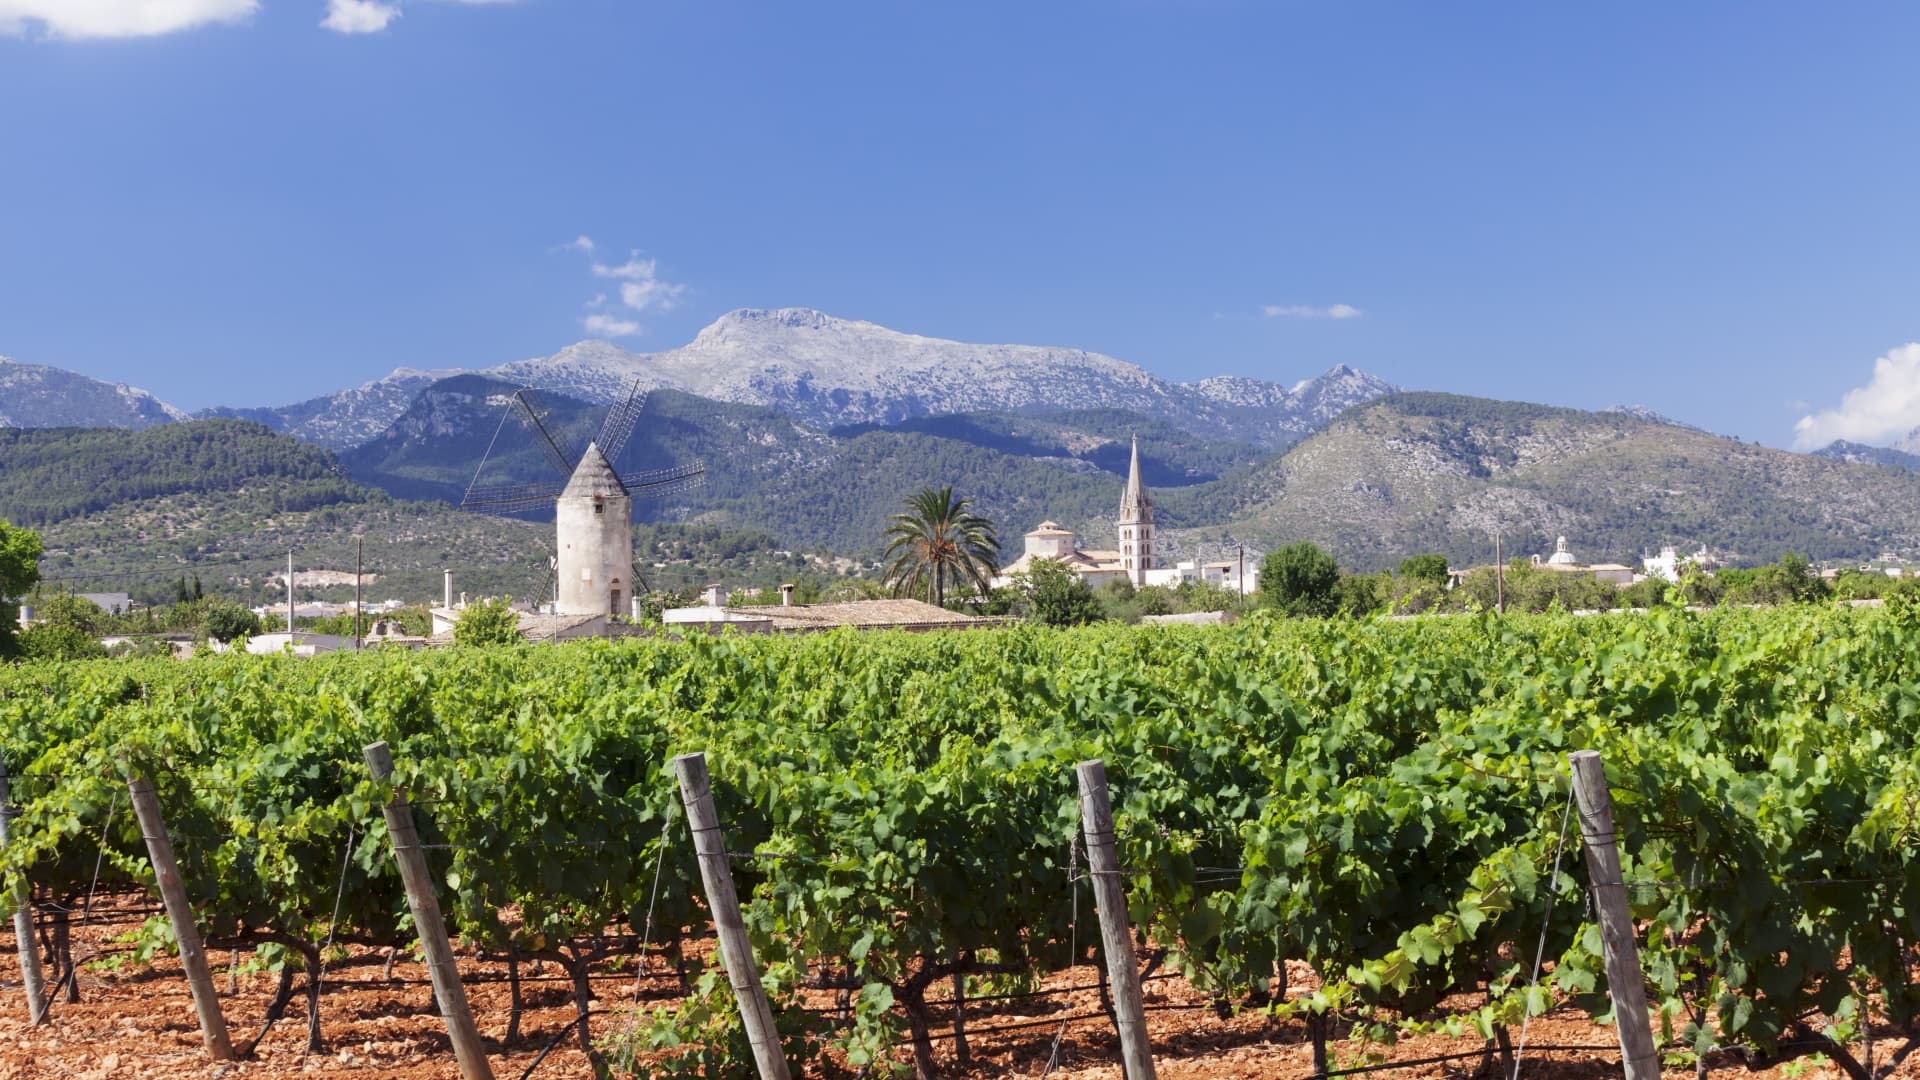 Binissalem, Mallorca, is surrounded by vineyards dating back to Roman times.